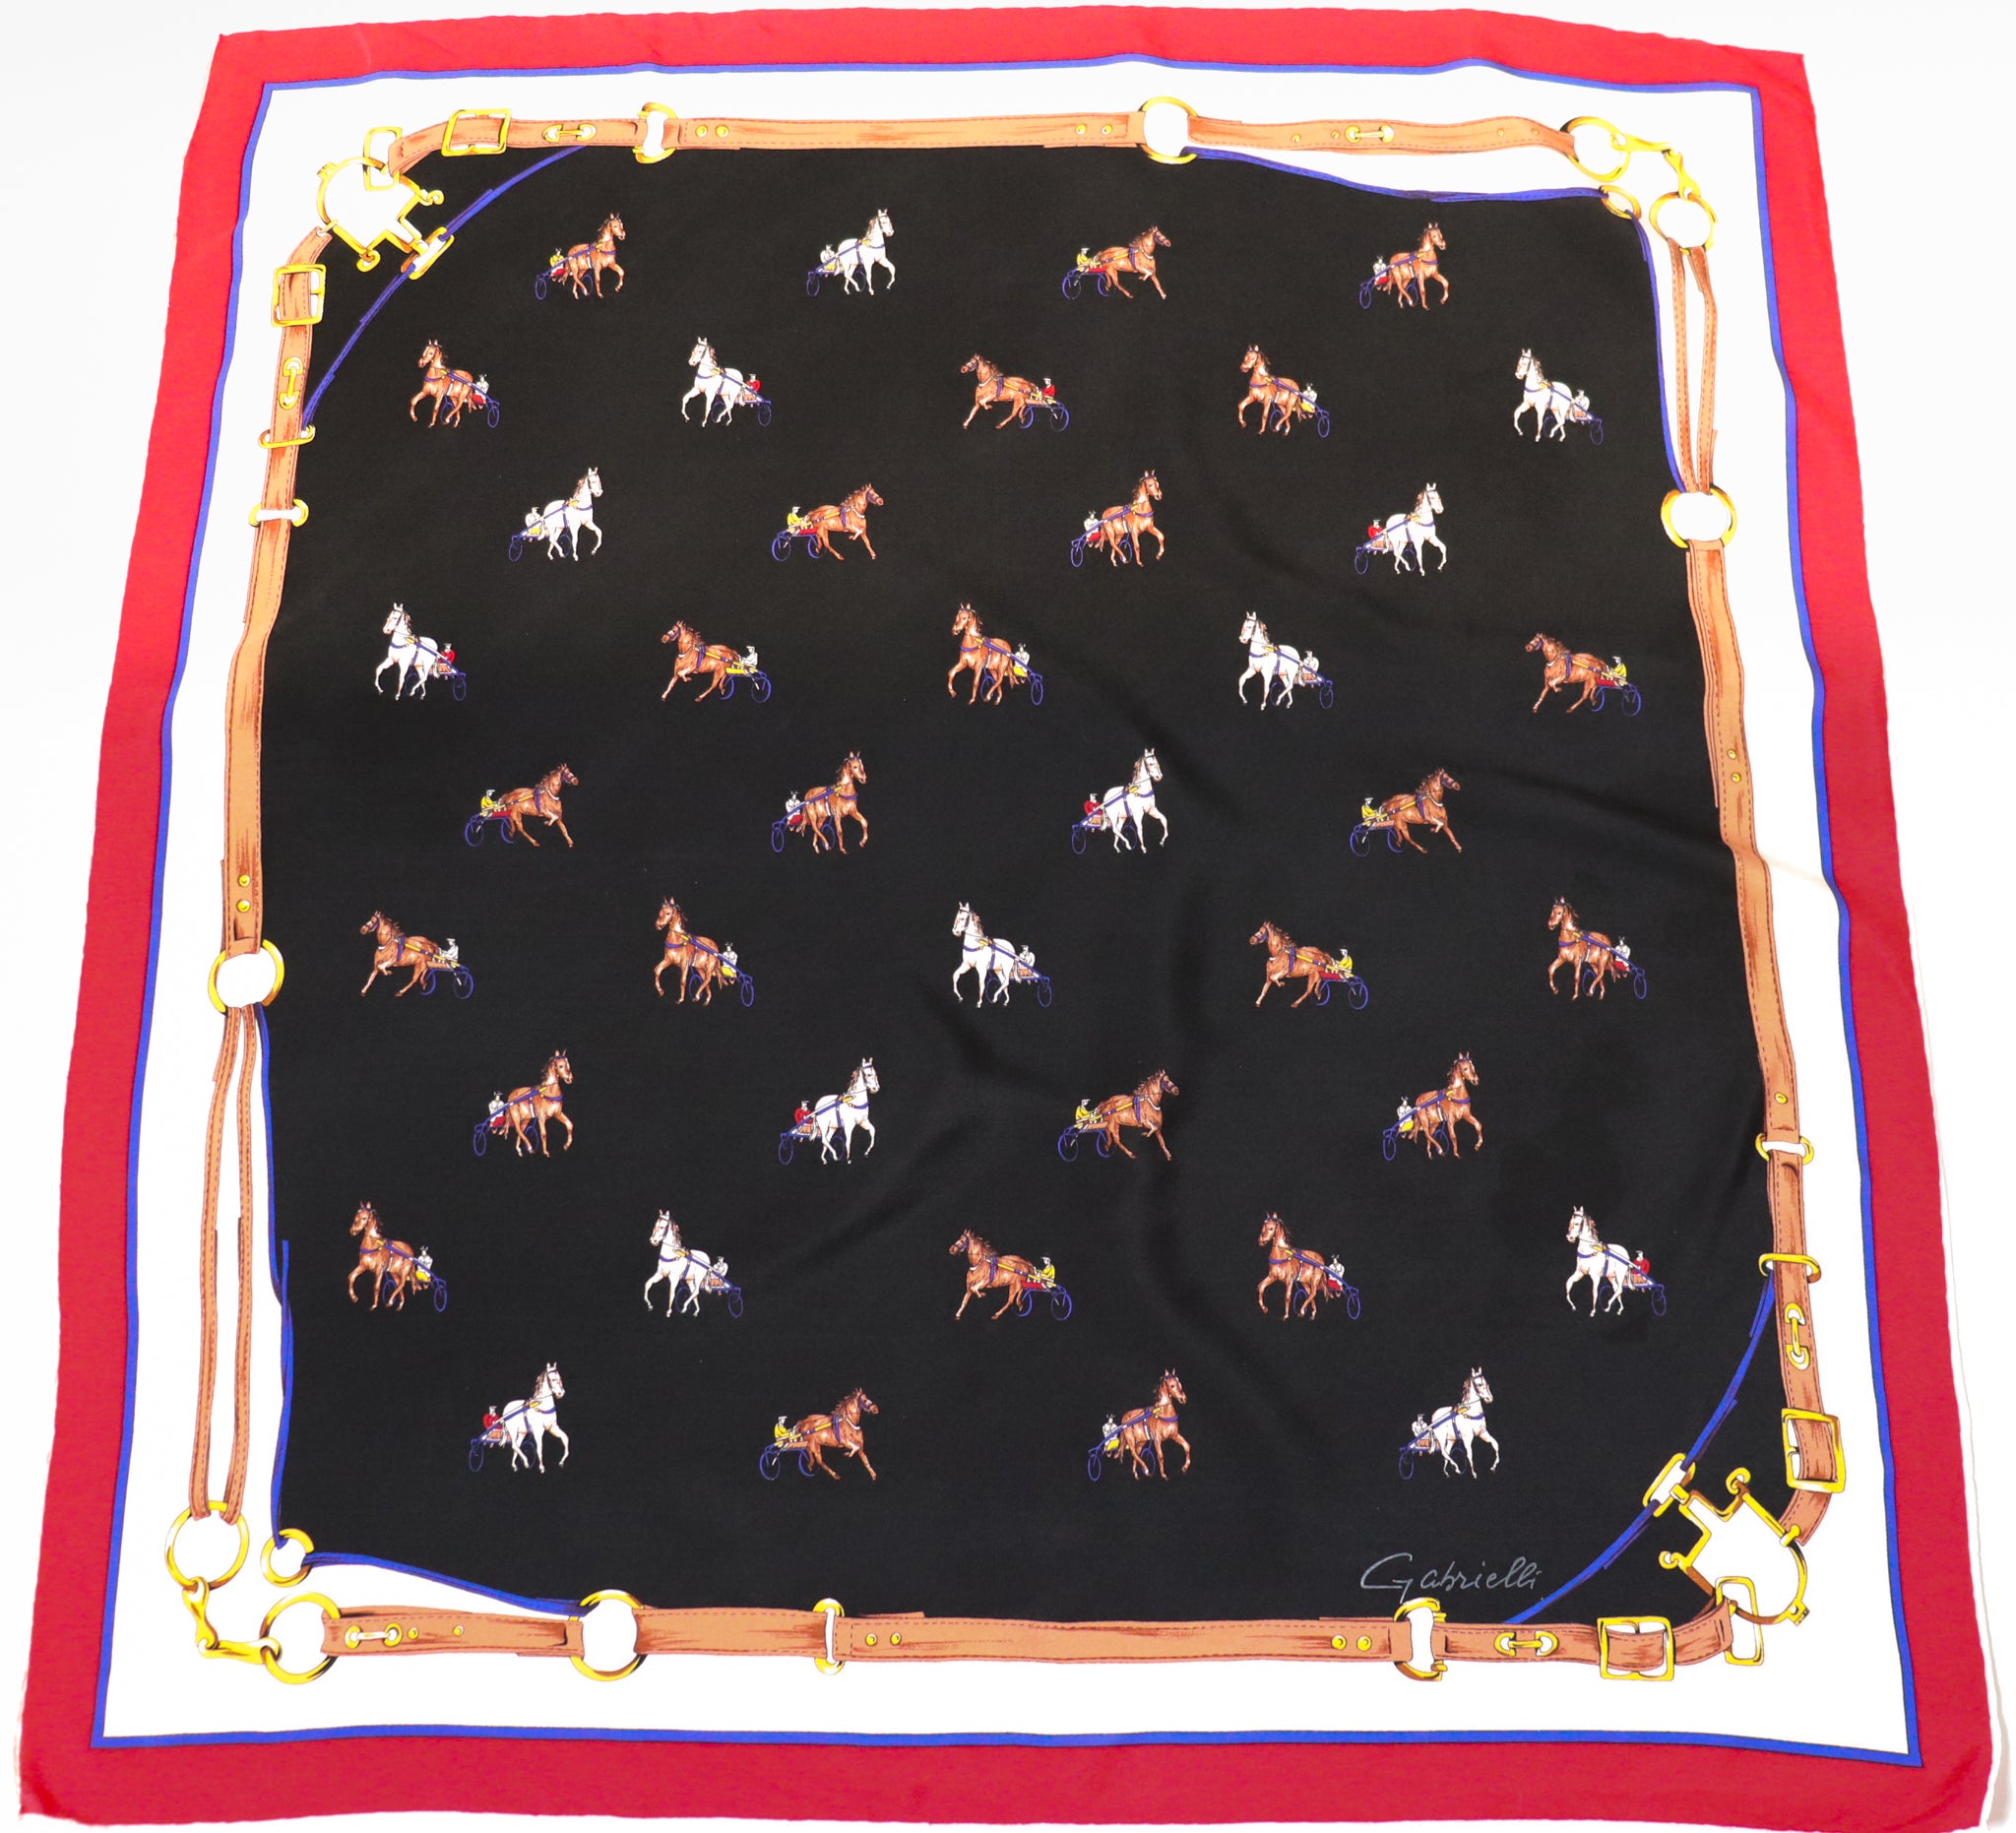 GABRIELLE Vintage Silk Scarf - 1970s - Chariot Horses - LARGE